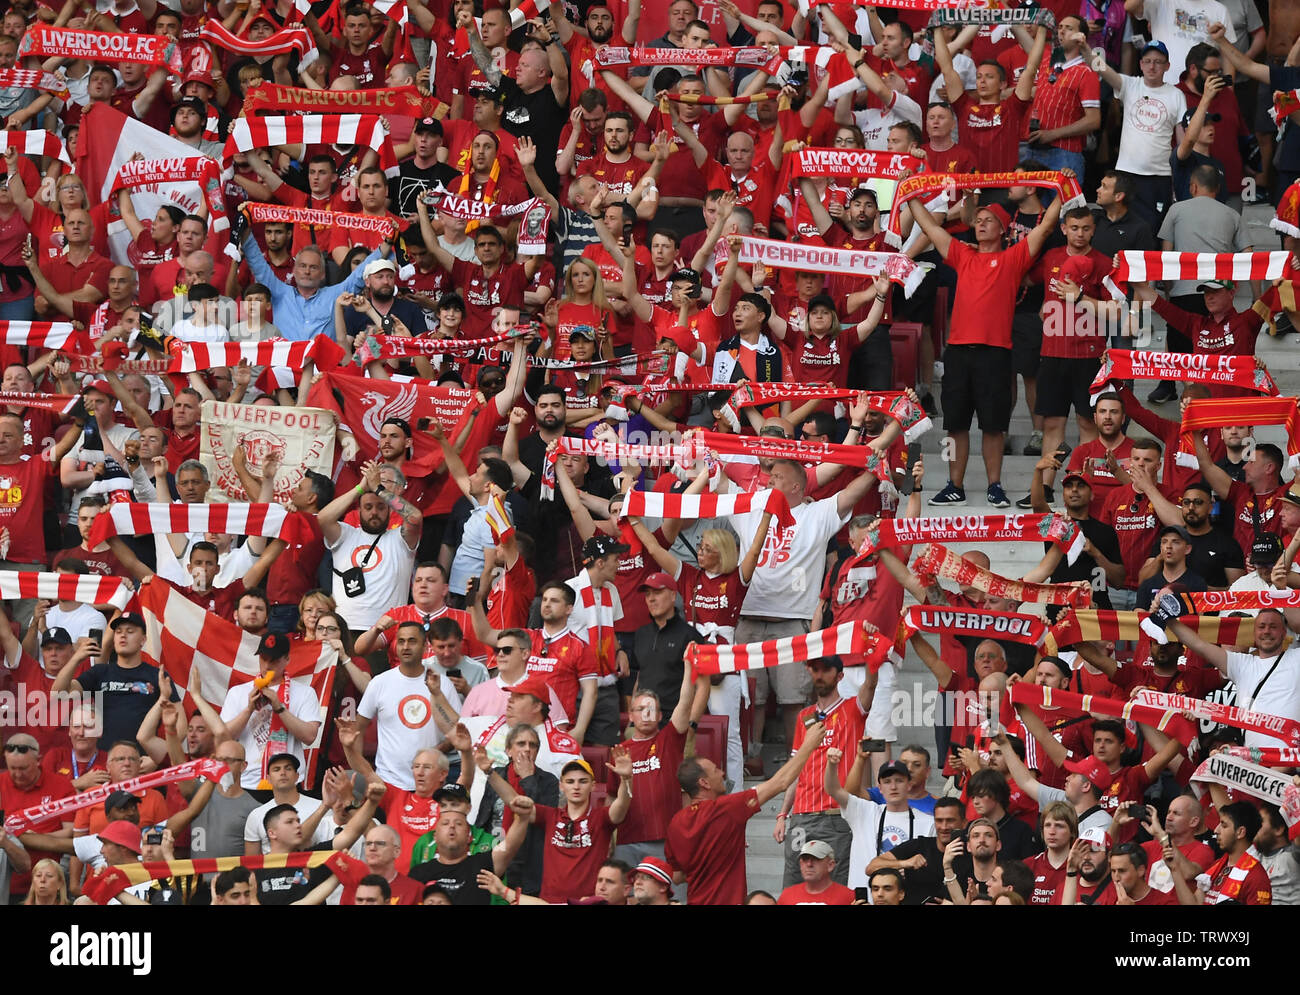 MADRID, SPAIN - JUNE 1, 2019: Liverpool fans pictured prior to the 2018/19 UEFA Champions League Final between Tottenham Hotspur (England) and Liverpool FC (England) at Wanda Metropolitano. Stock Photo